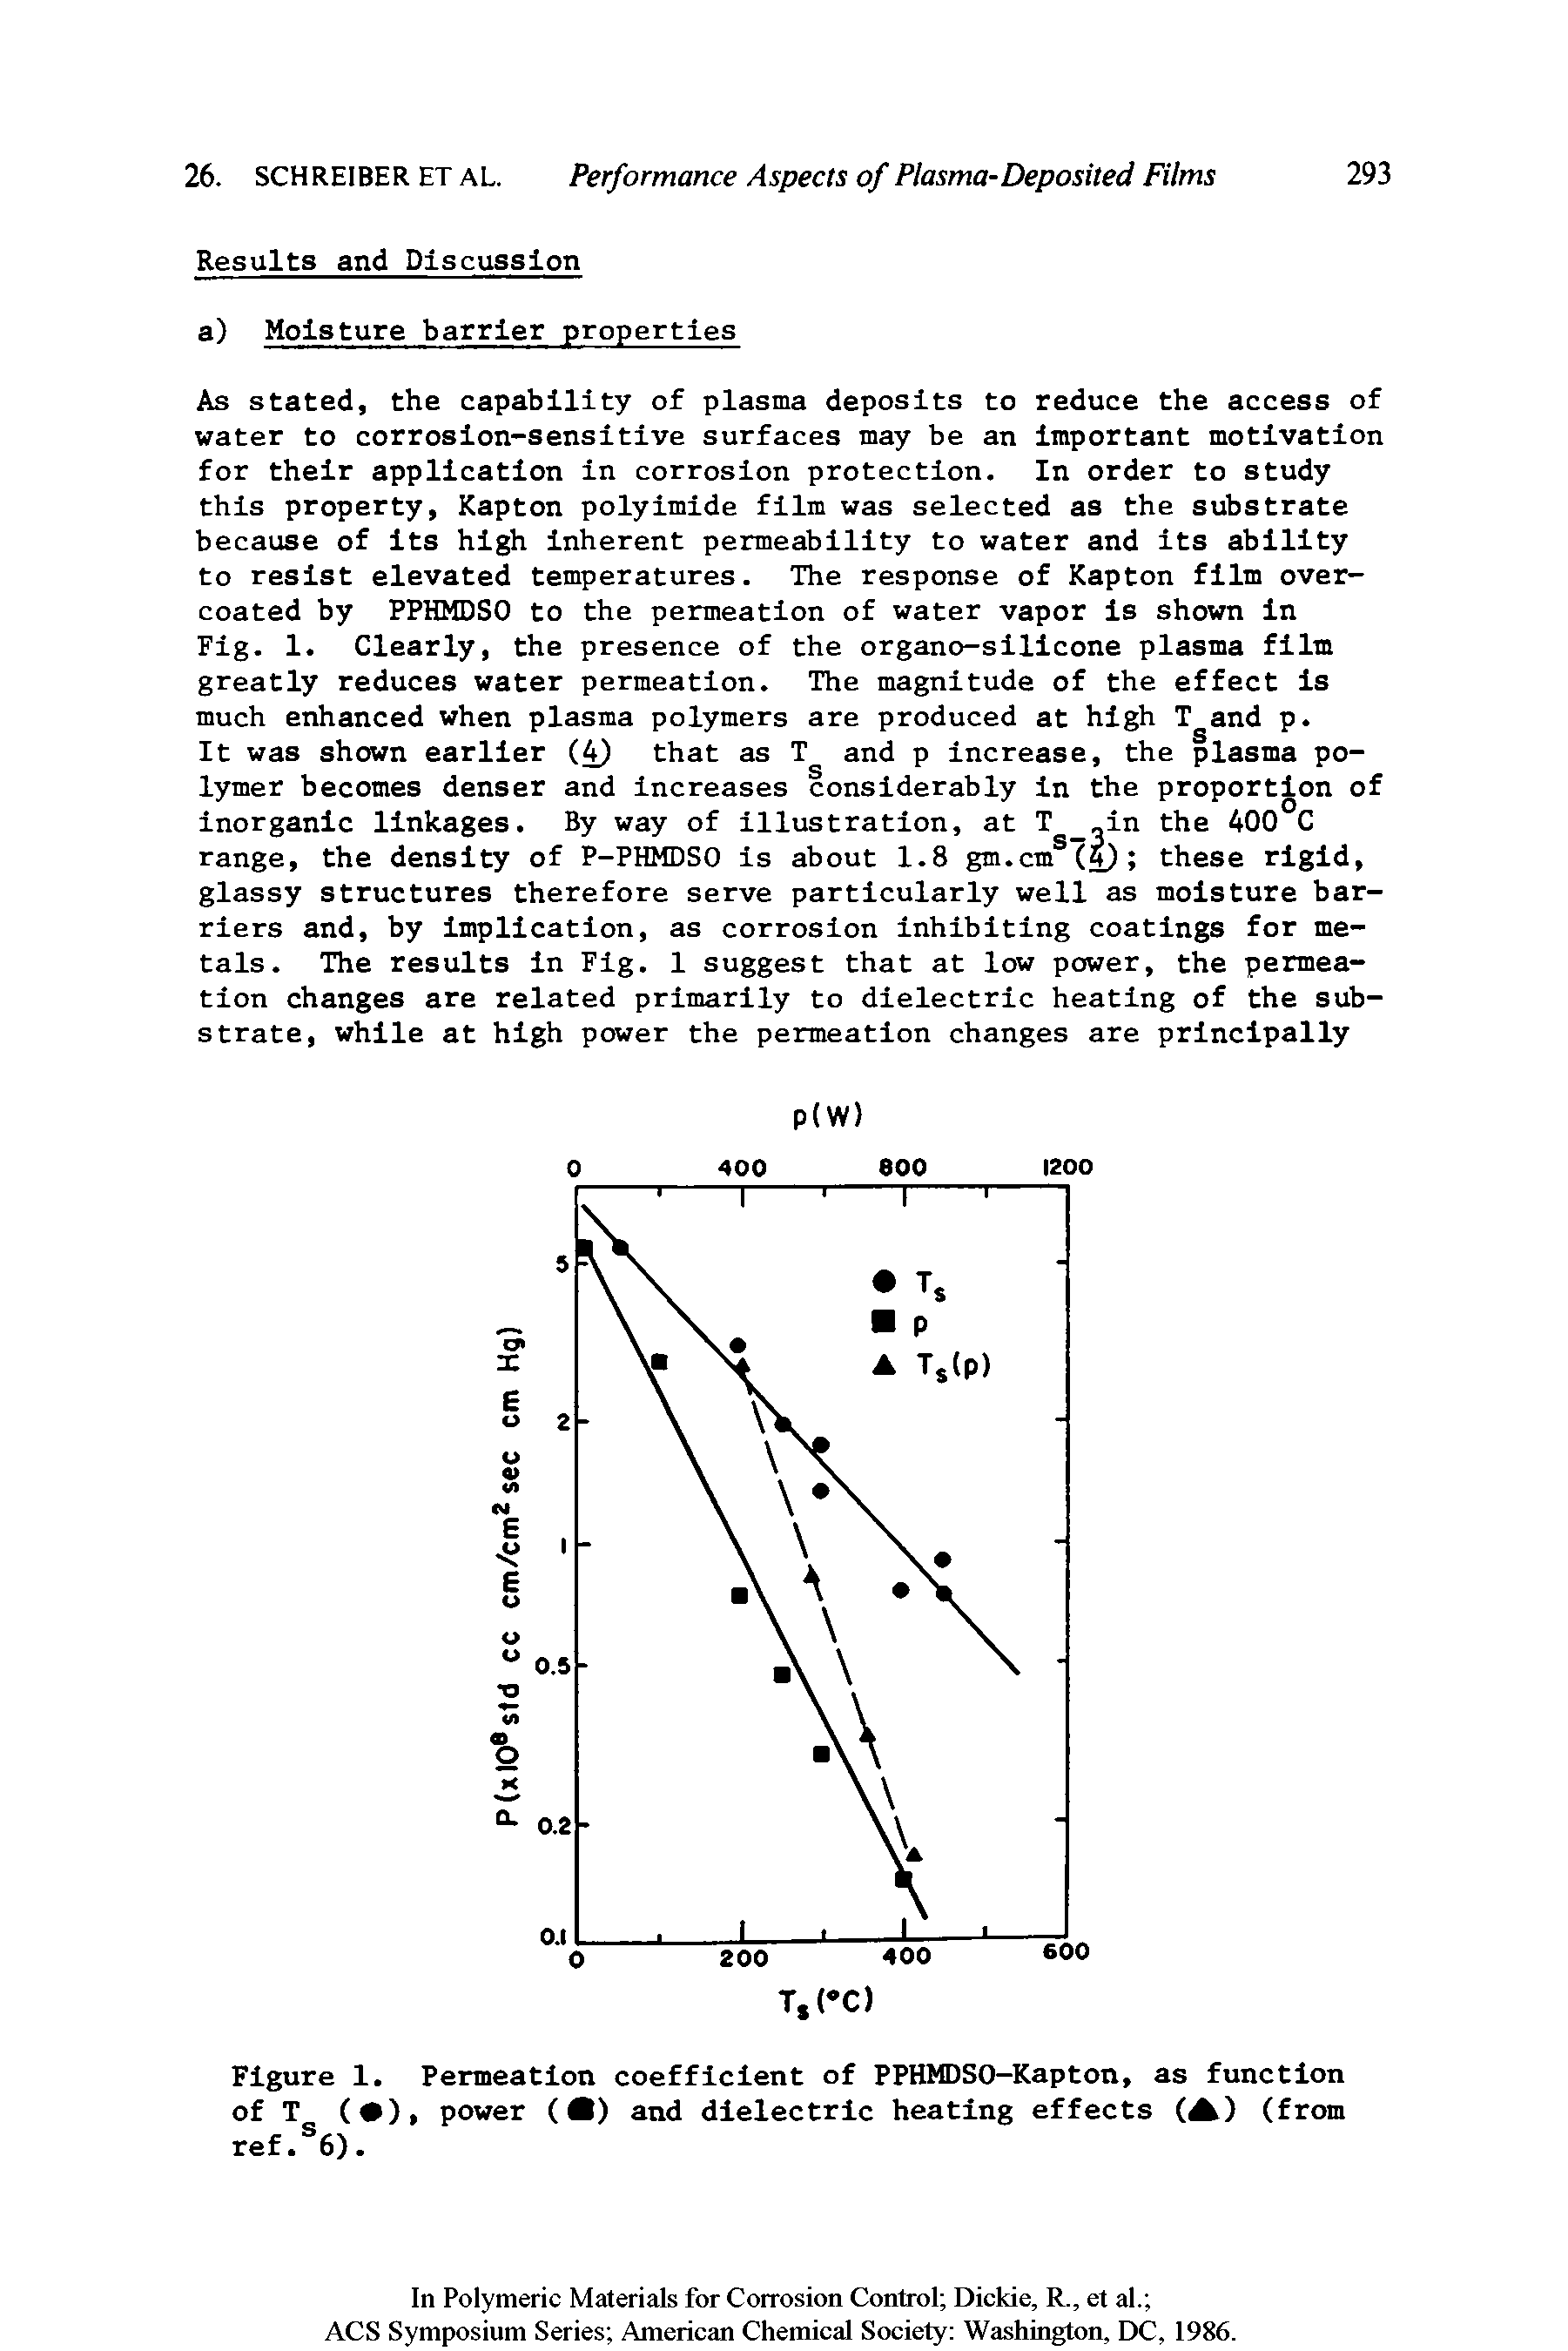 Figure 1. Permeation coefficient of PPHMDSO-Kapton, as function of T ( ), power (A) and dielectric heating effects (A) (from ref. 6).